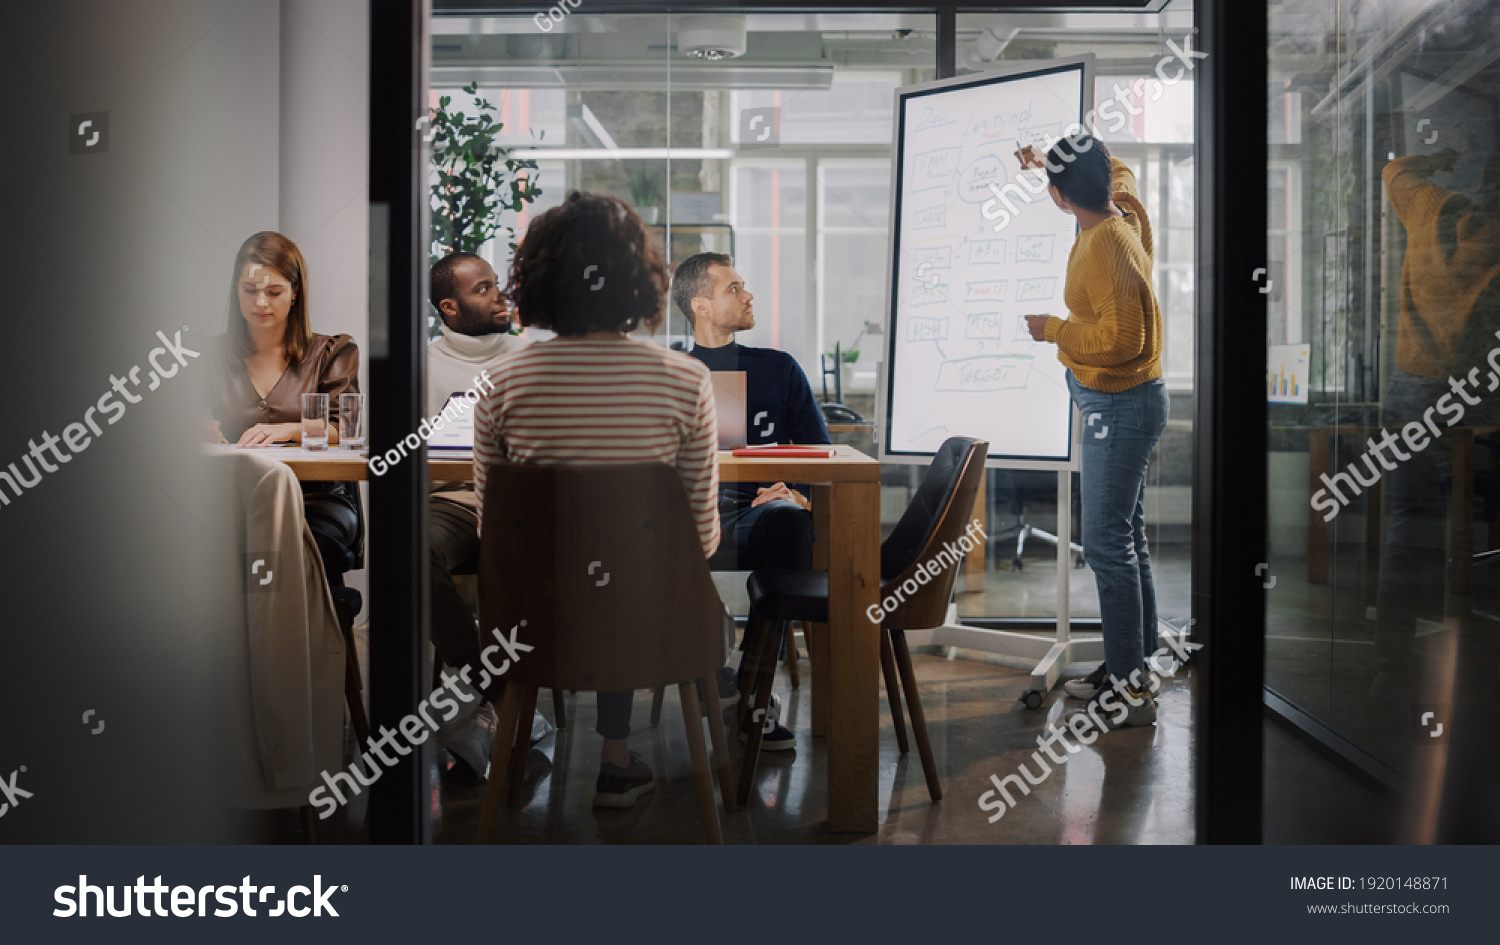 Project Manager Makes a Presentation for a Young Diverse Creative Team in Meeting Room in an Agency. Colleagues Sit Behind Conference Table and Discuss Business Development, User Interface and Design. #1920148871